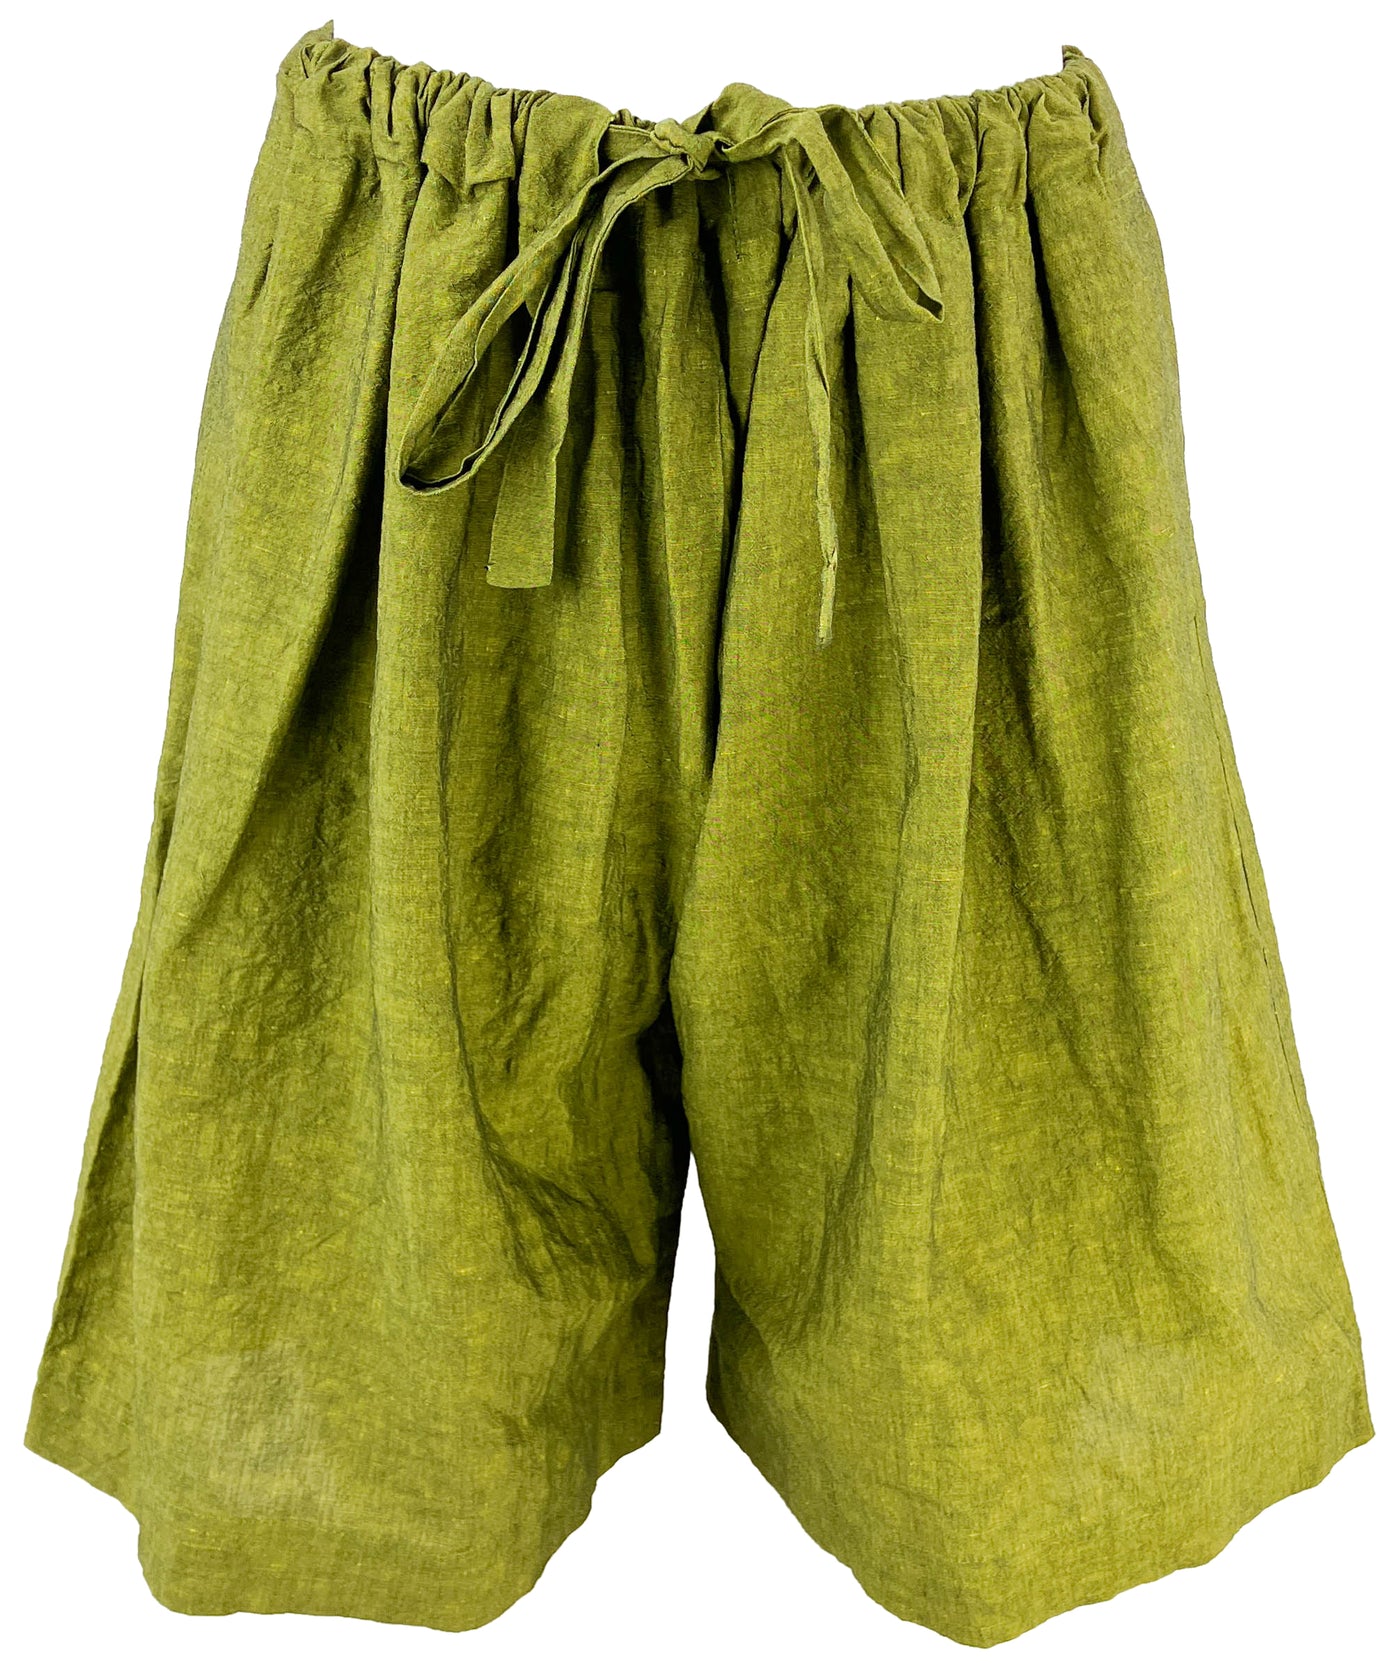 Christian Wijnants Shorts in Green - Discounts on Christian Wijnants at UAL